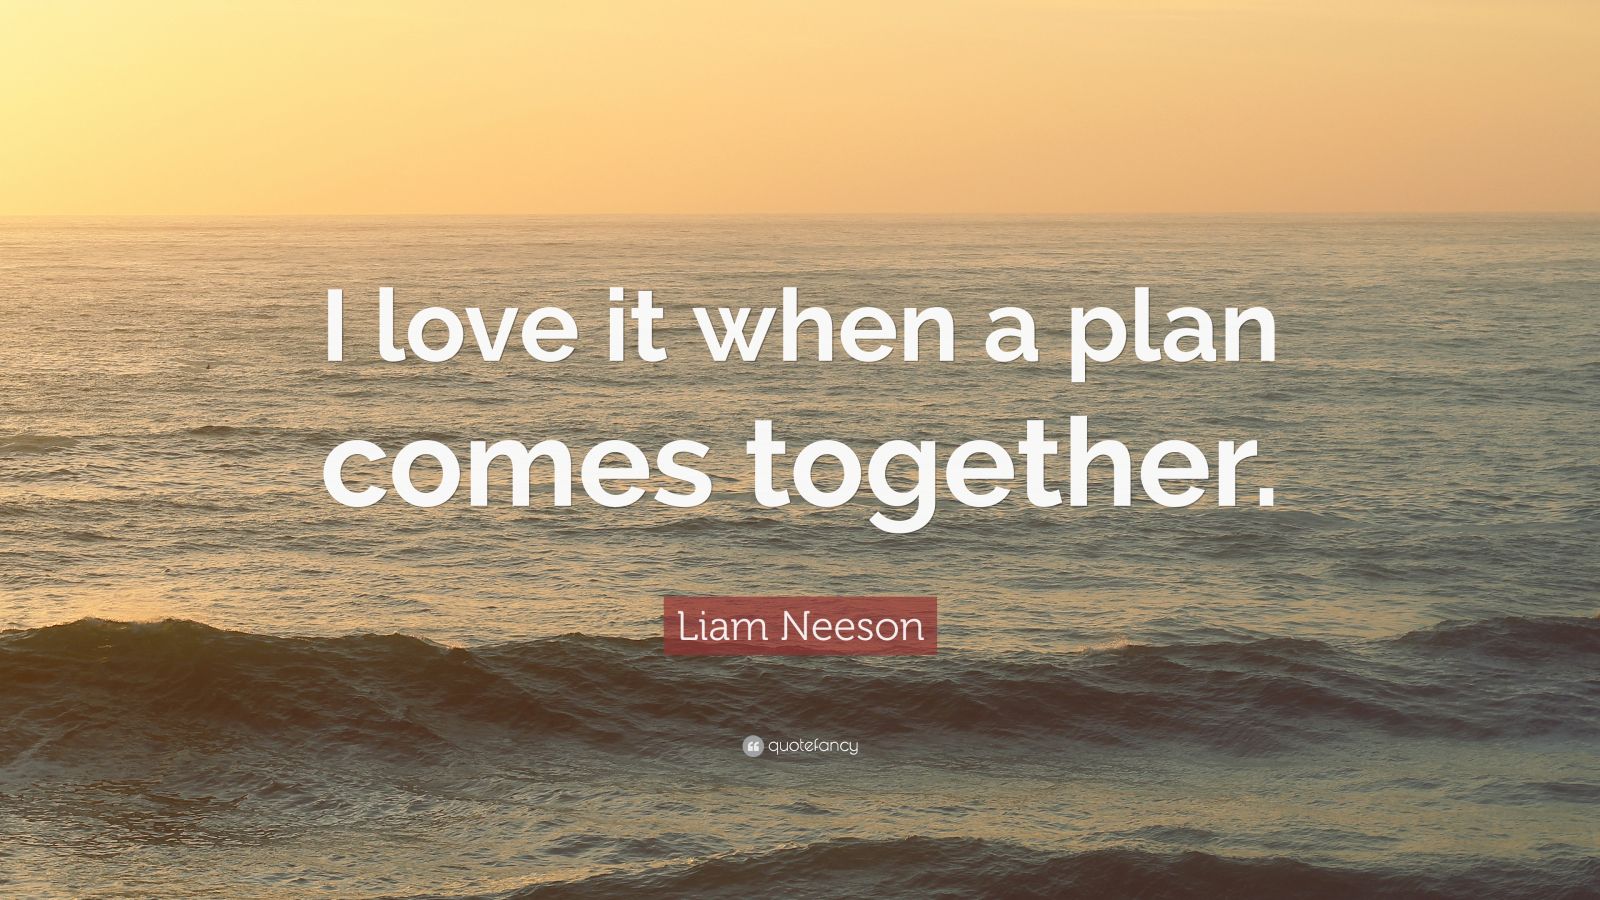 Liam Neeson Quote: “I love it when a plan comes together.” (12